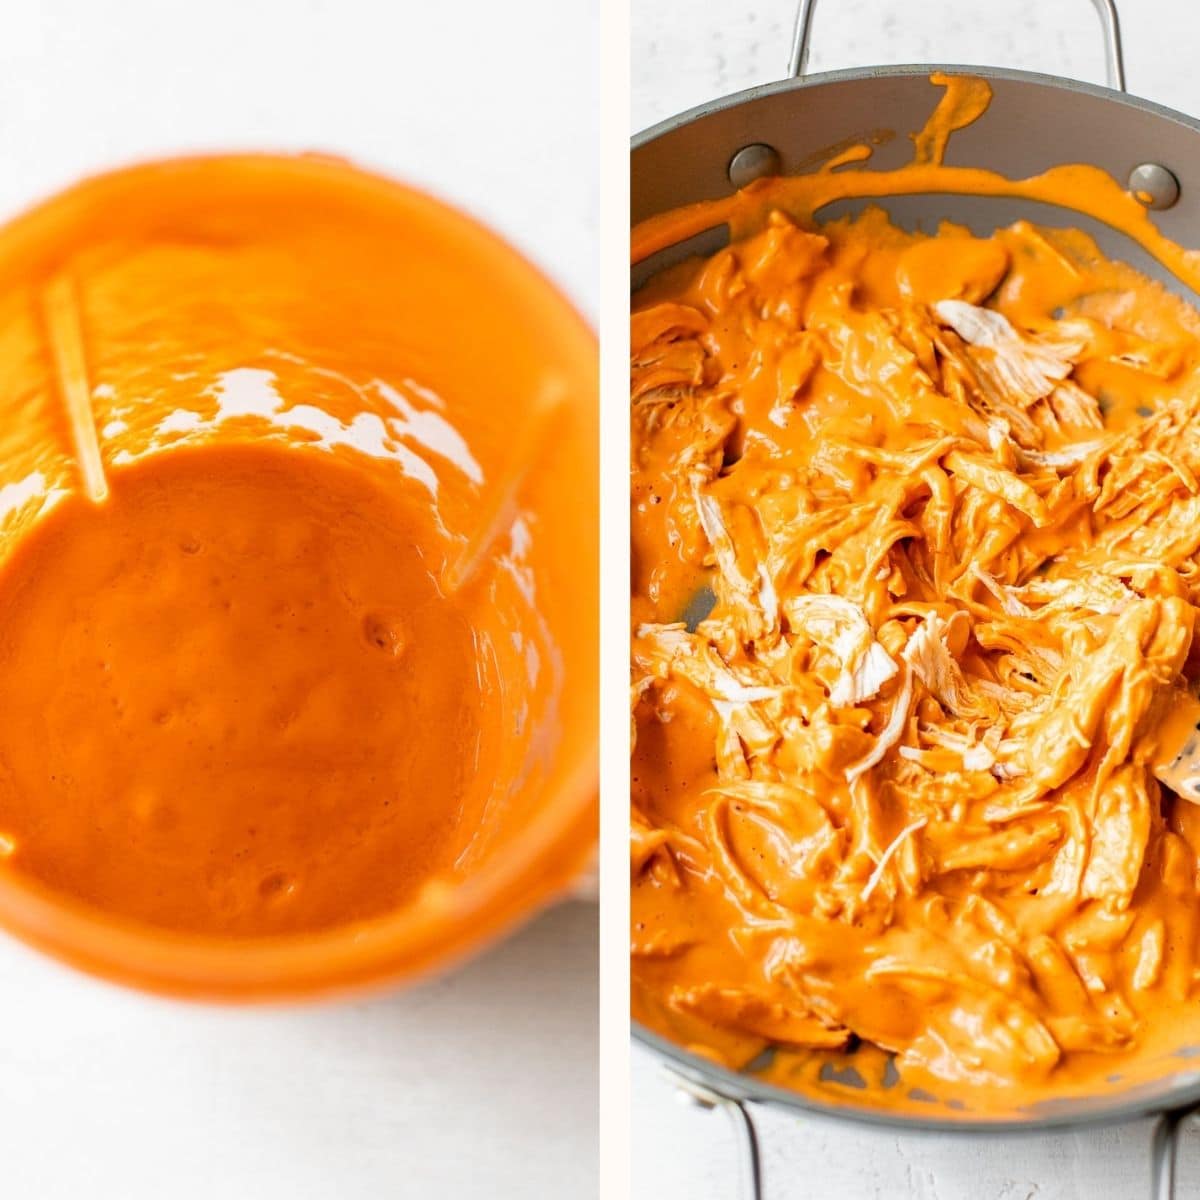 chipotle sauce in a blender and shredded chicken marinated in the sauce